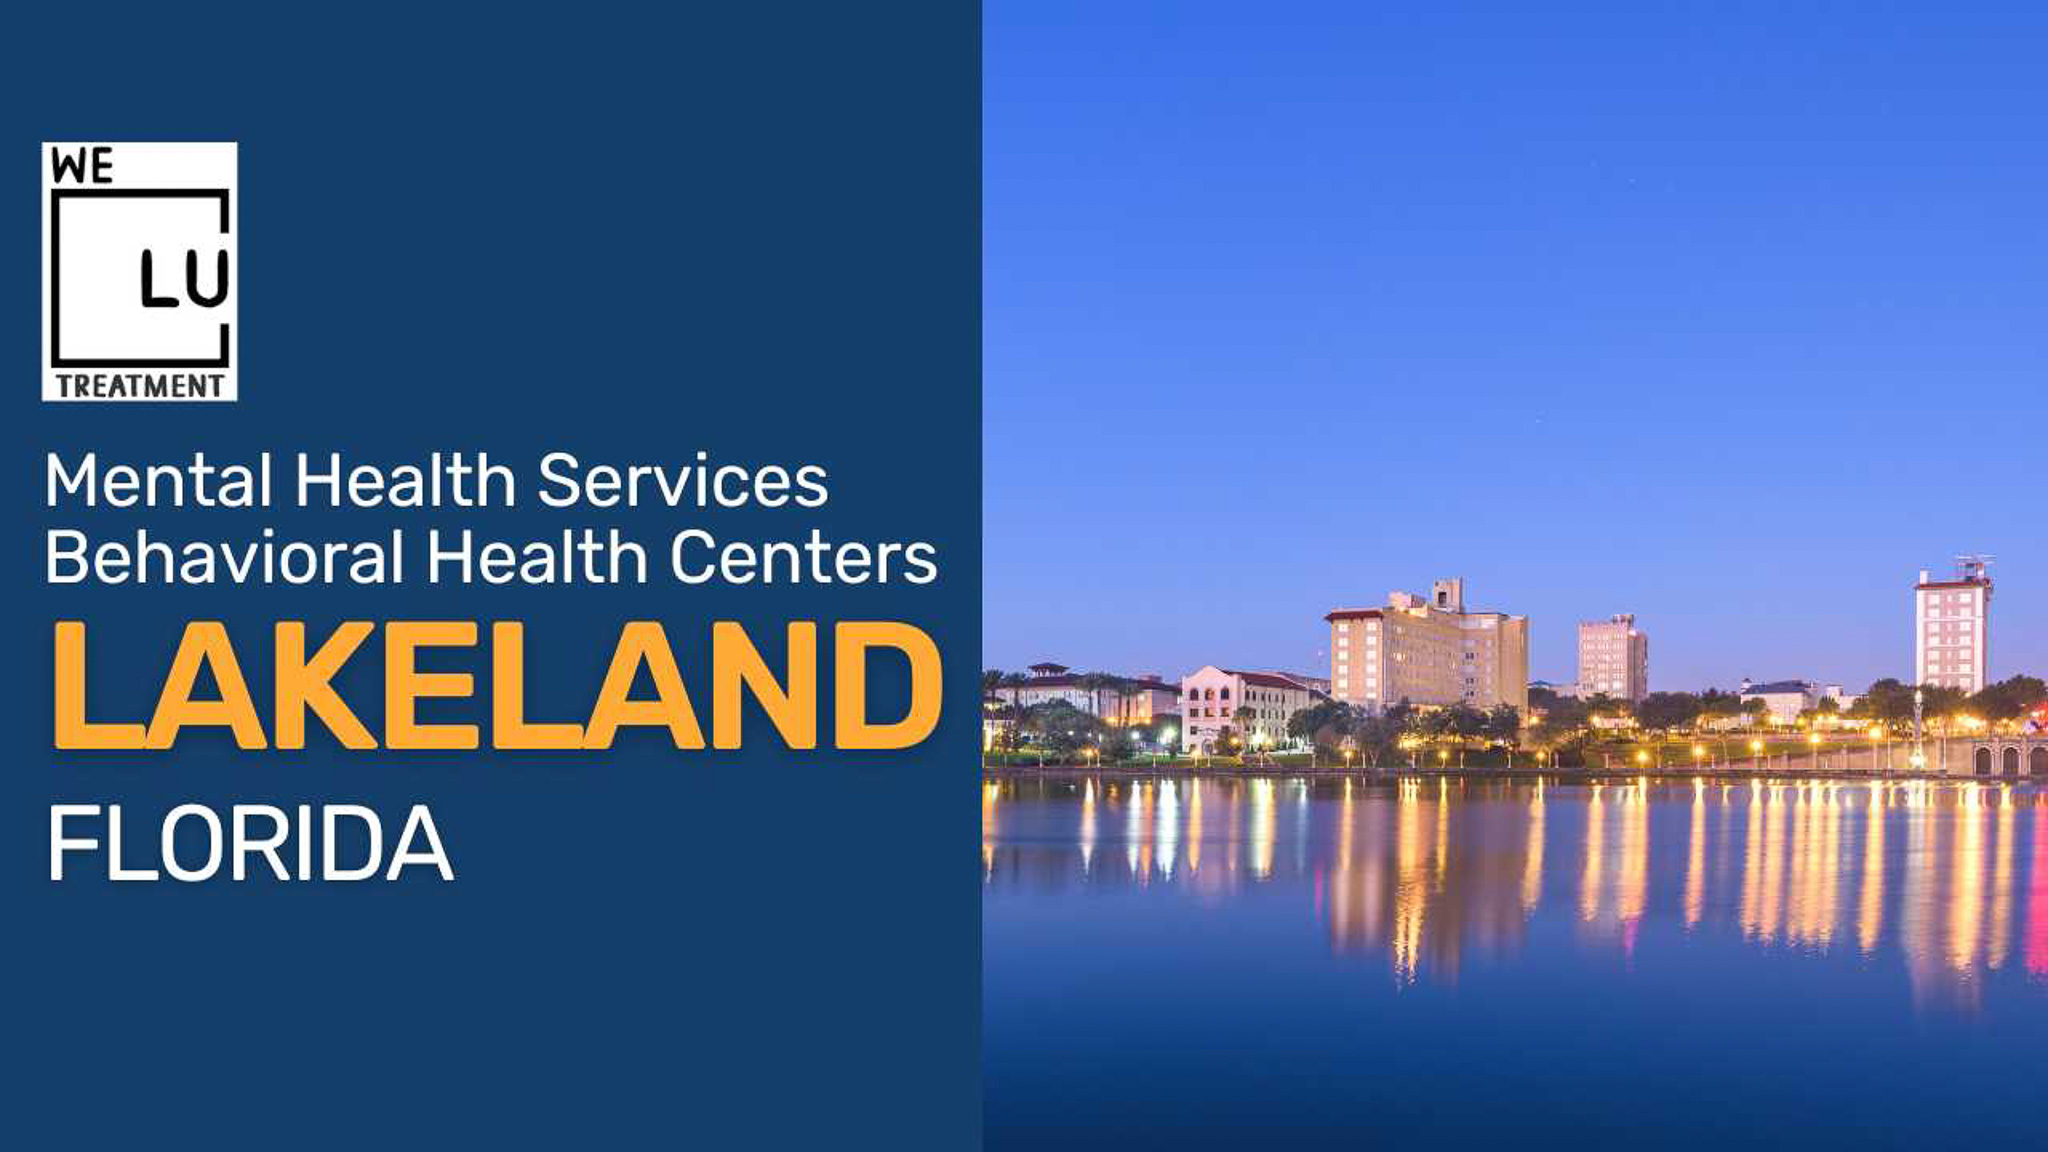 Lakeland FL (MH) We Level Up treatment center for drug and alcohol rehab detox and mental health services - Image 1